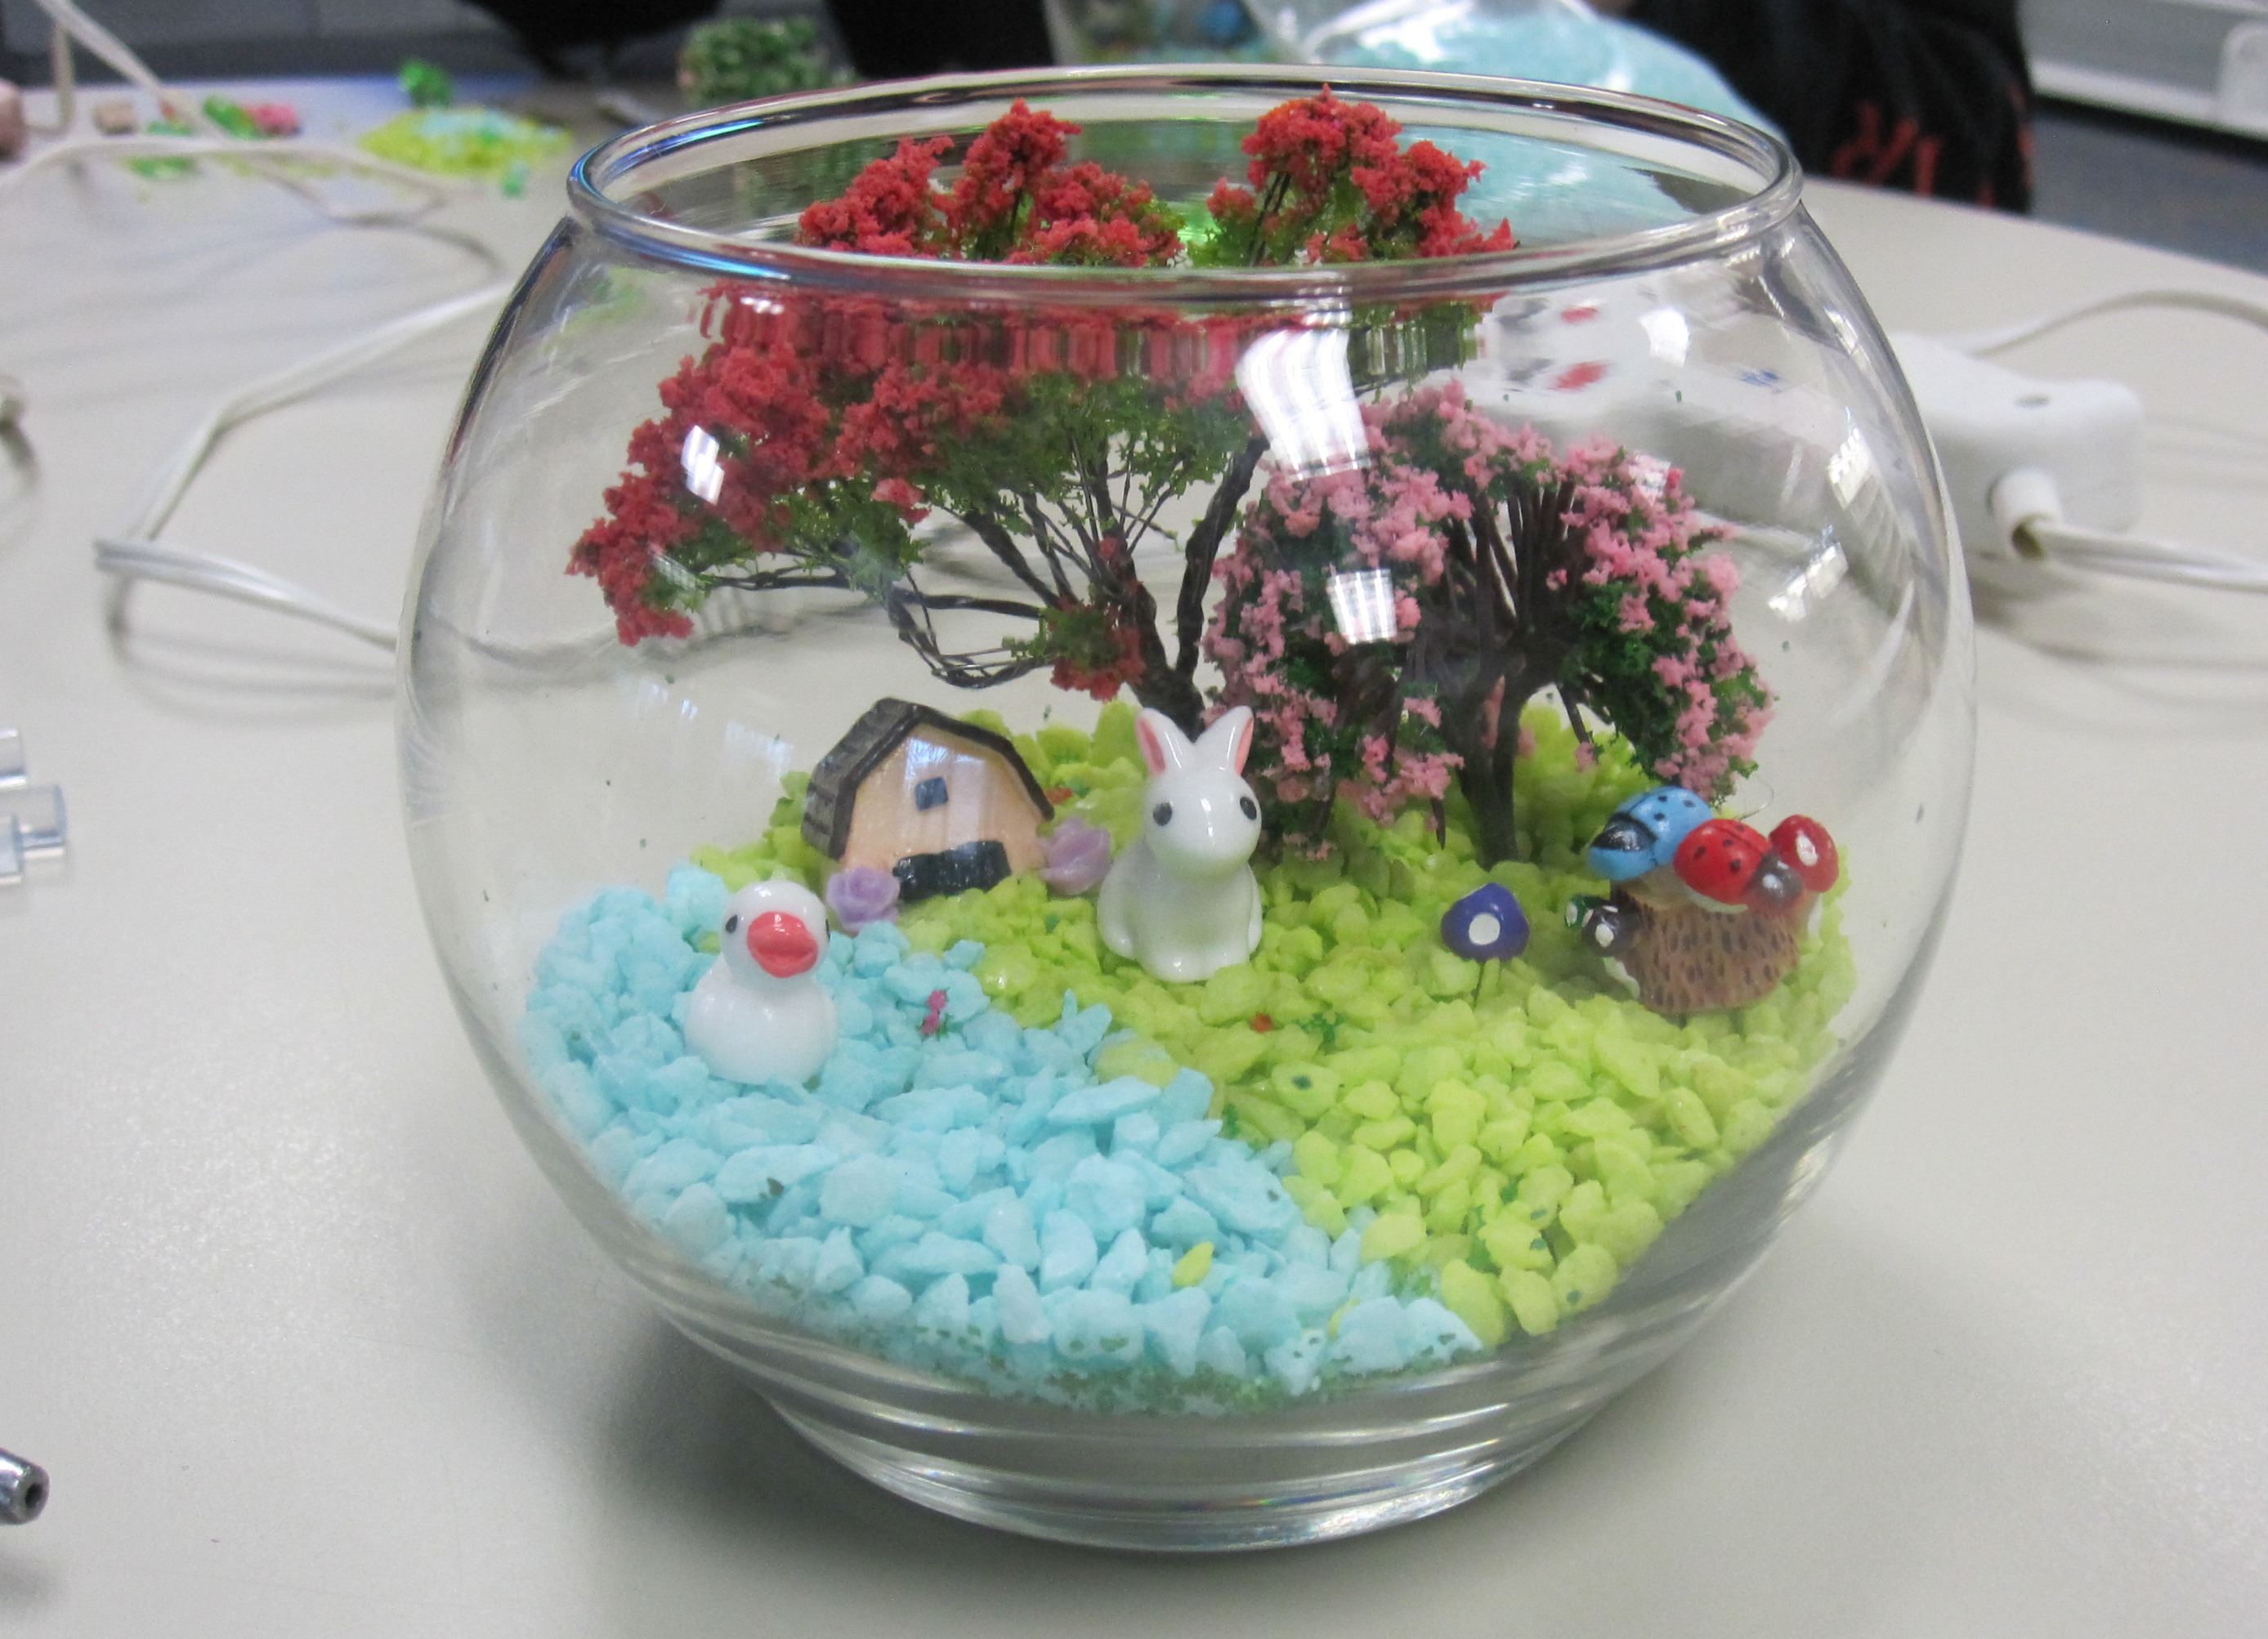 glass bowl terrarium holding colored rocks and sand, small trees, duck figurine, and rabbit figurine